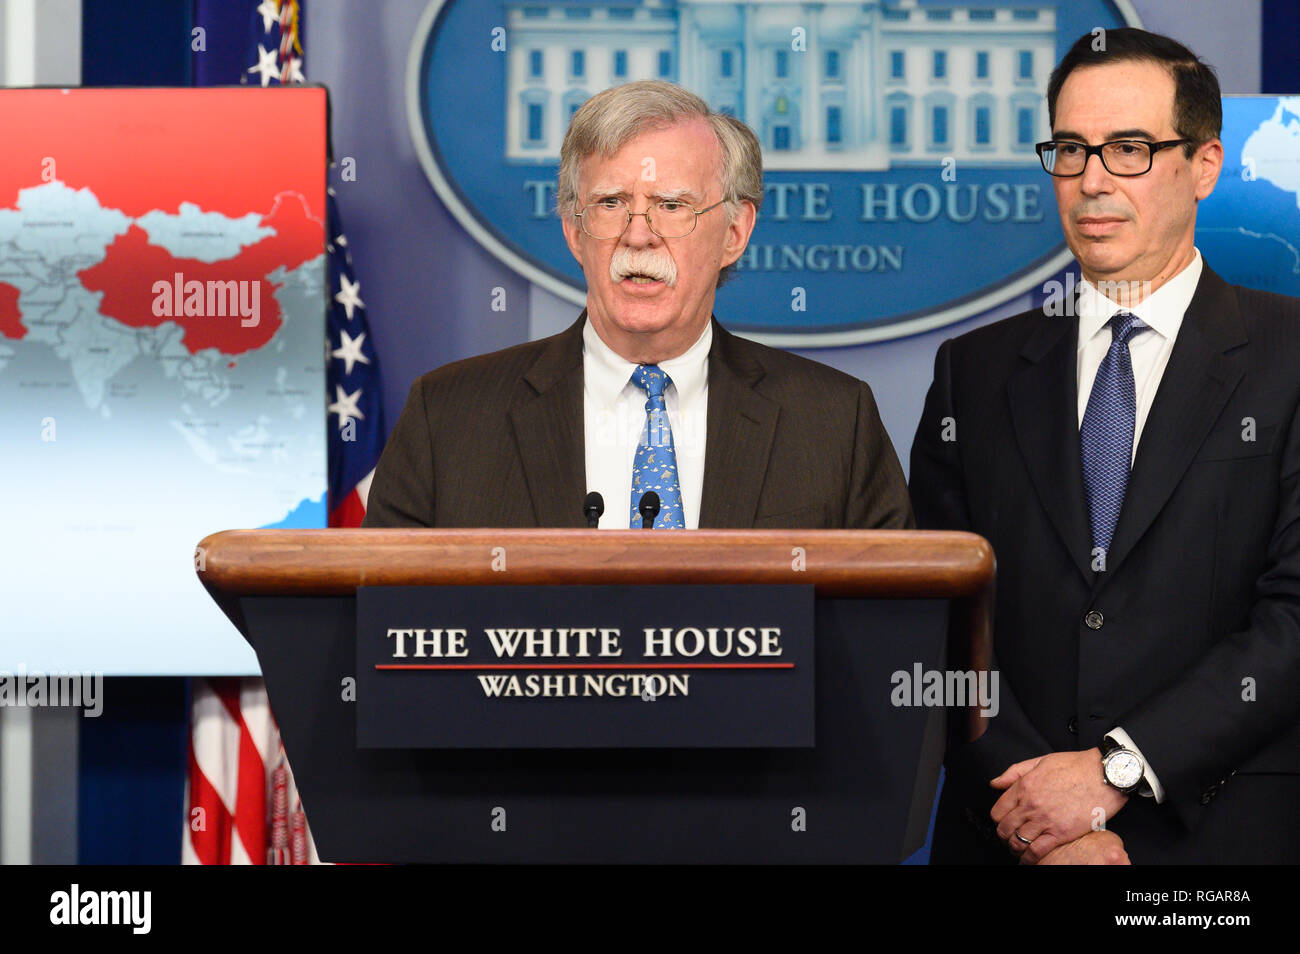 John Bolton, National Security Advisor of the United States, and Steven Mnuchin, United States Secretary of the Treasury, in the White House Press Briefing room at the White House in Washington, DC. Stock Photo